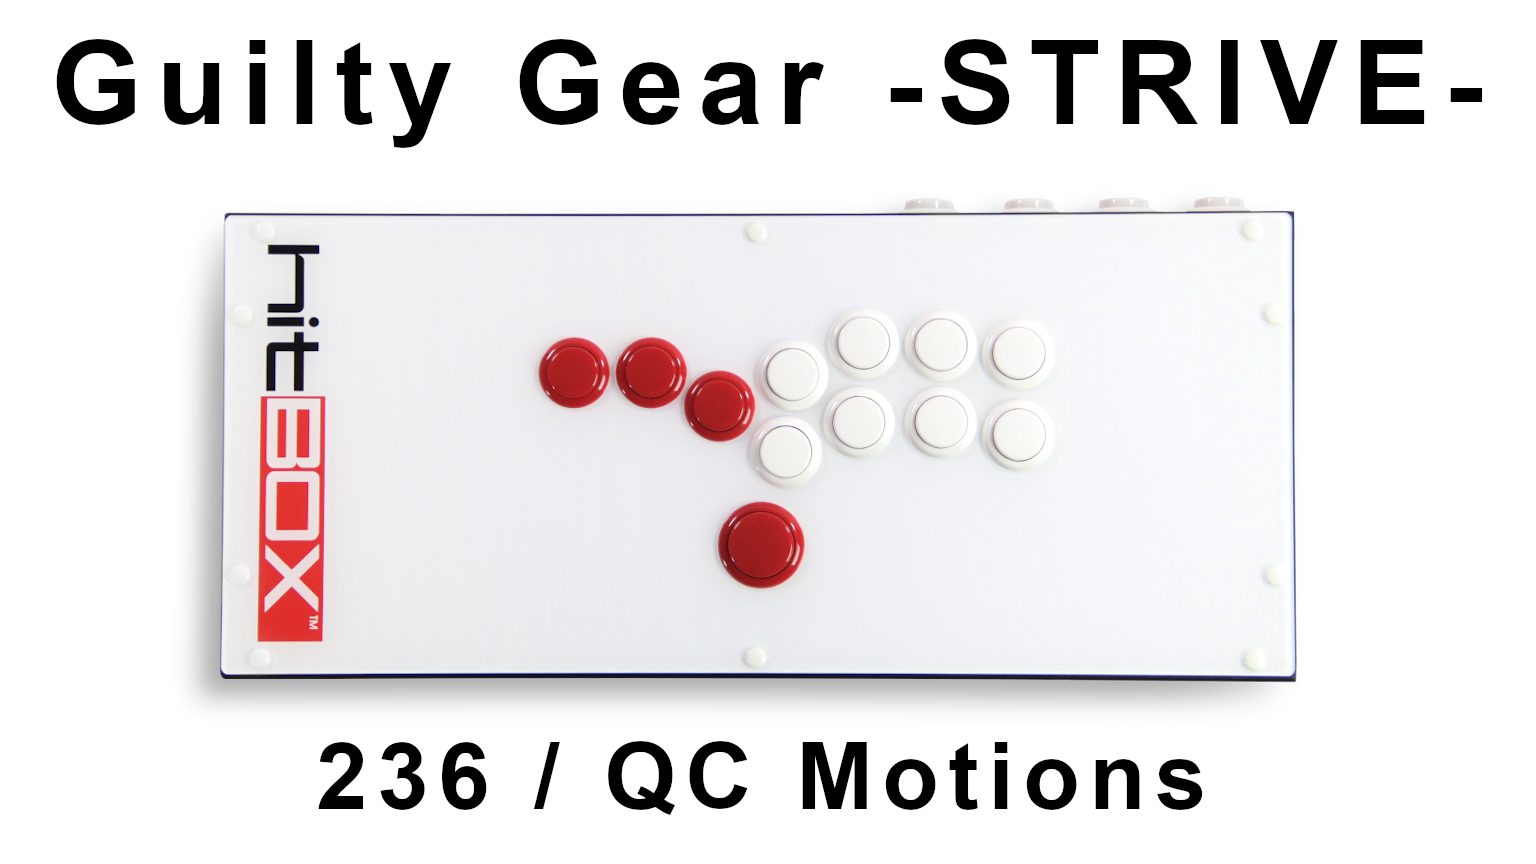 Guilty Gear -STRIVE- on Hit Box - 236 / Quarter Circle Motions